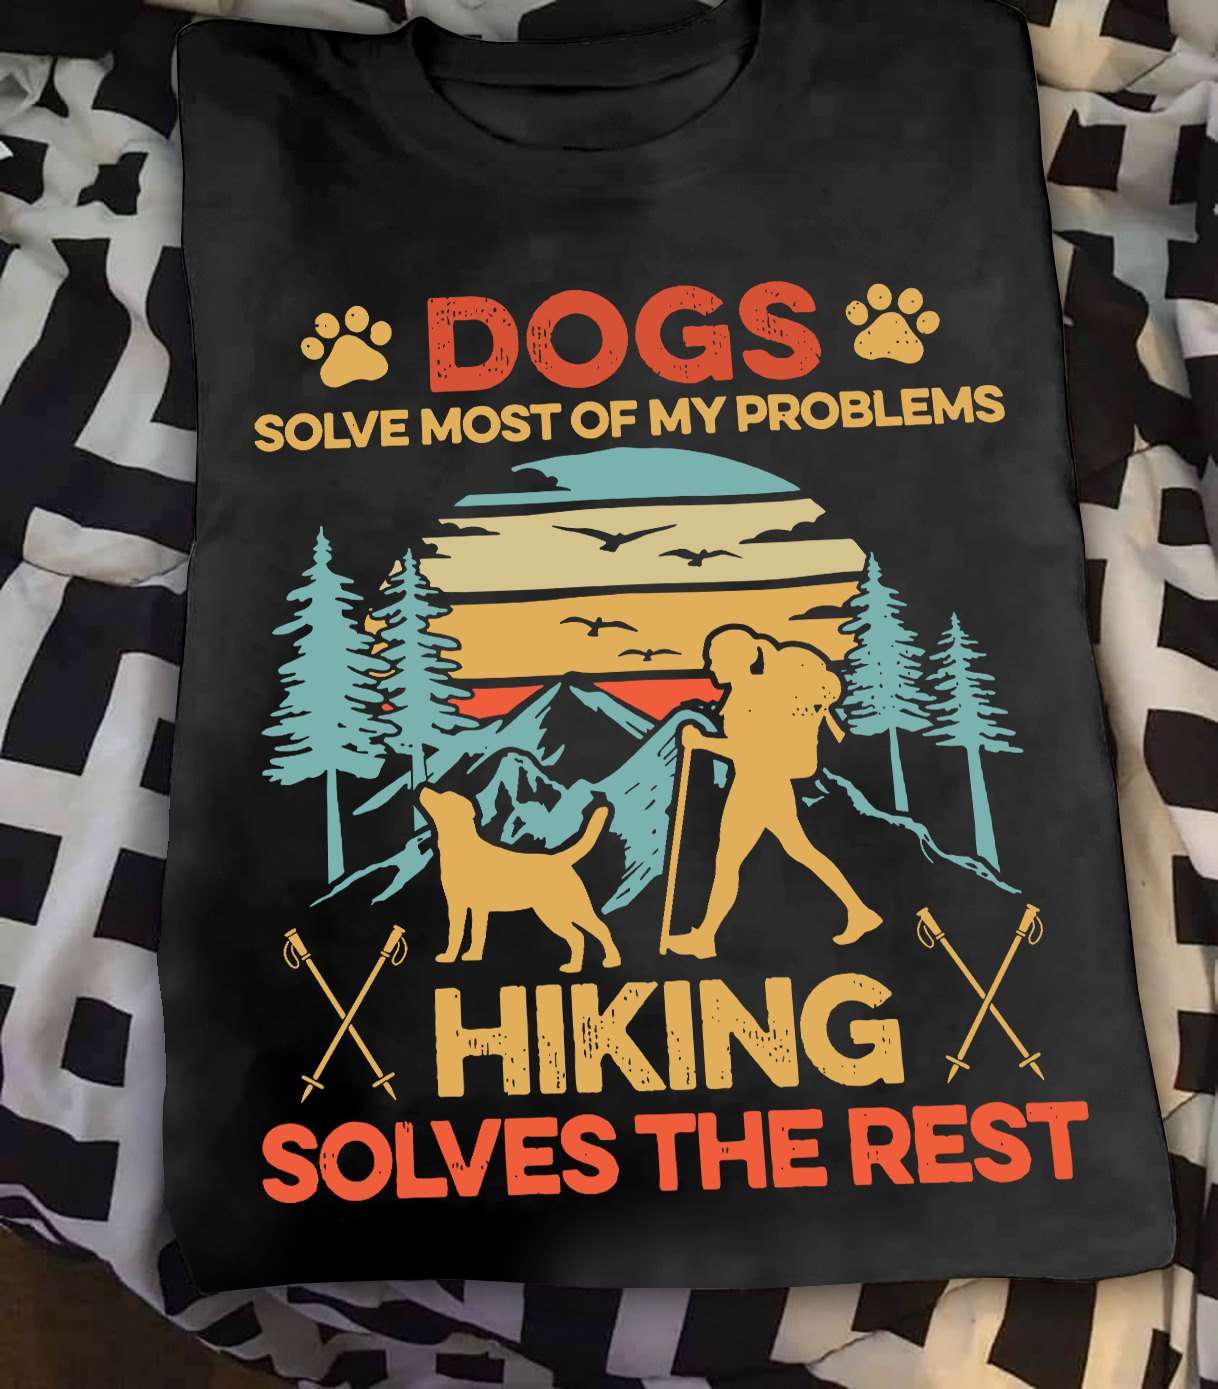 Dogs solve most of my problems - Hiking solves the rest, dog and hiking